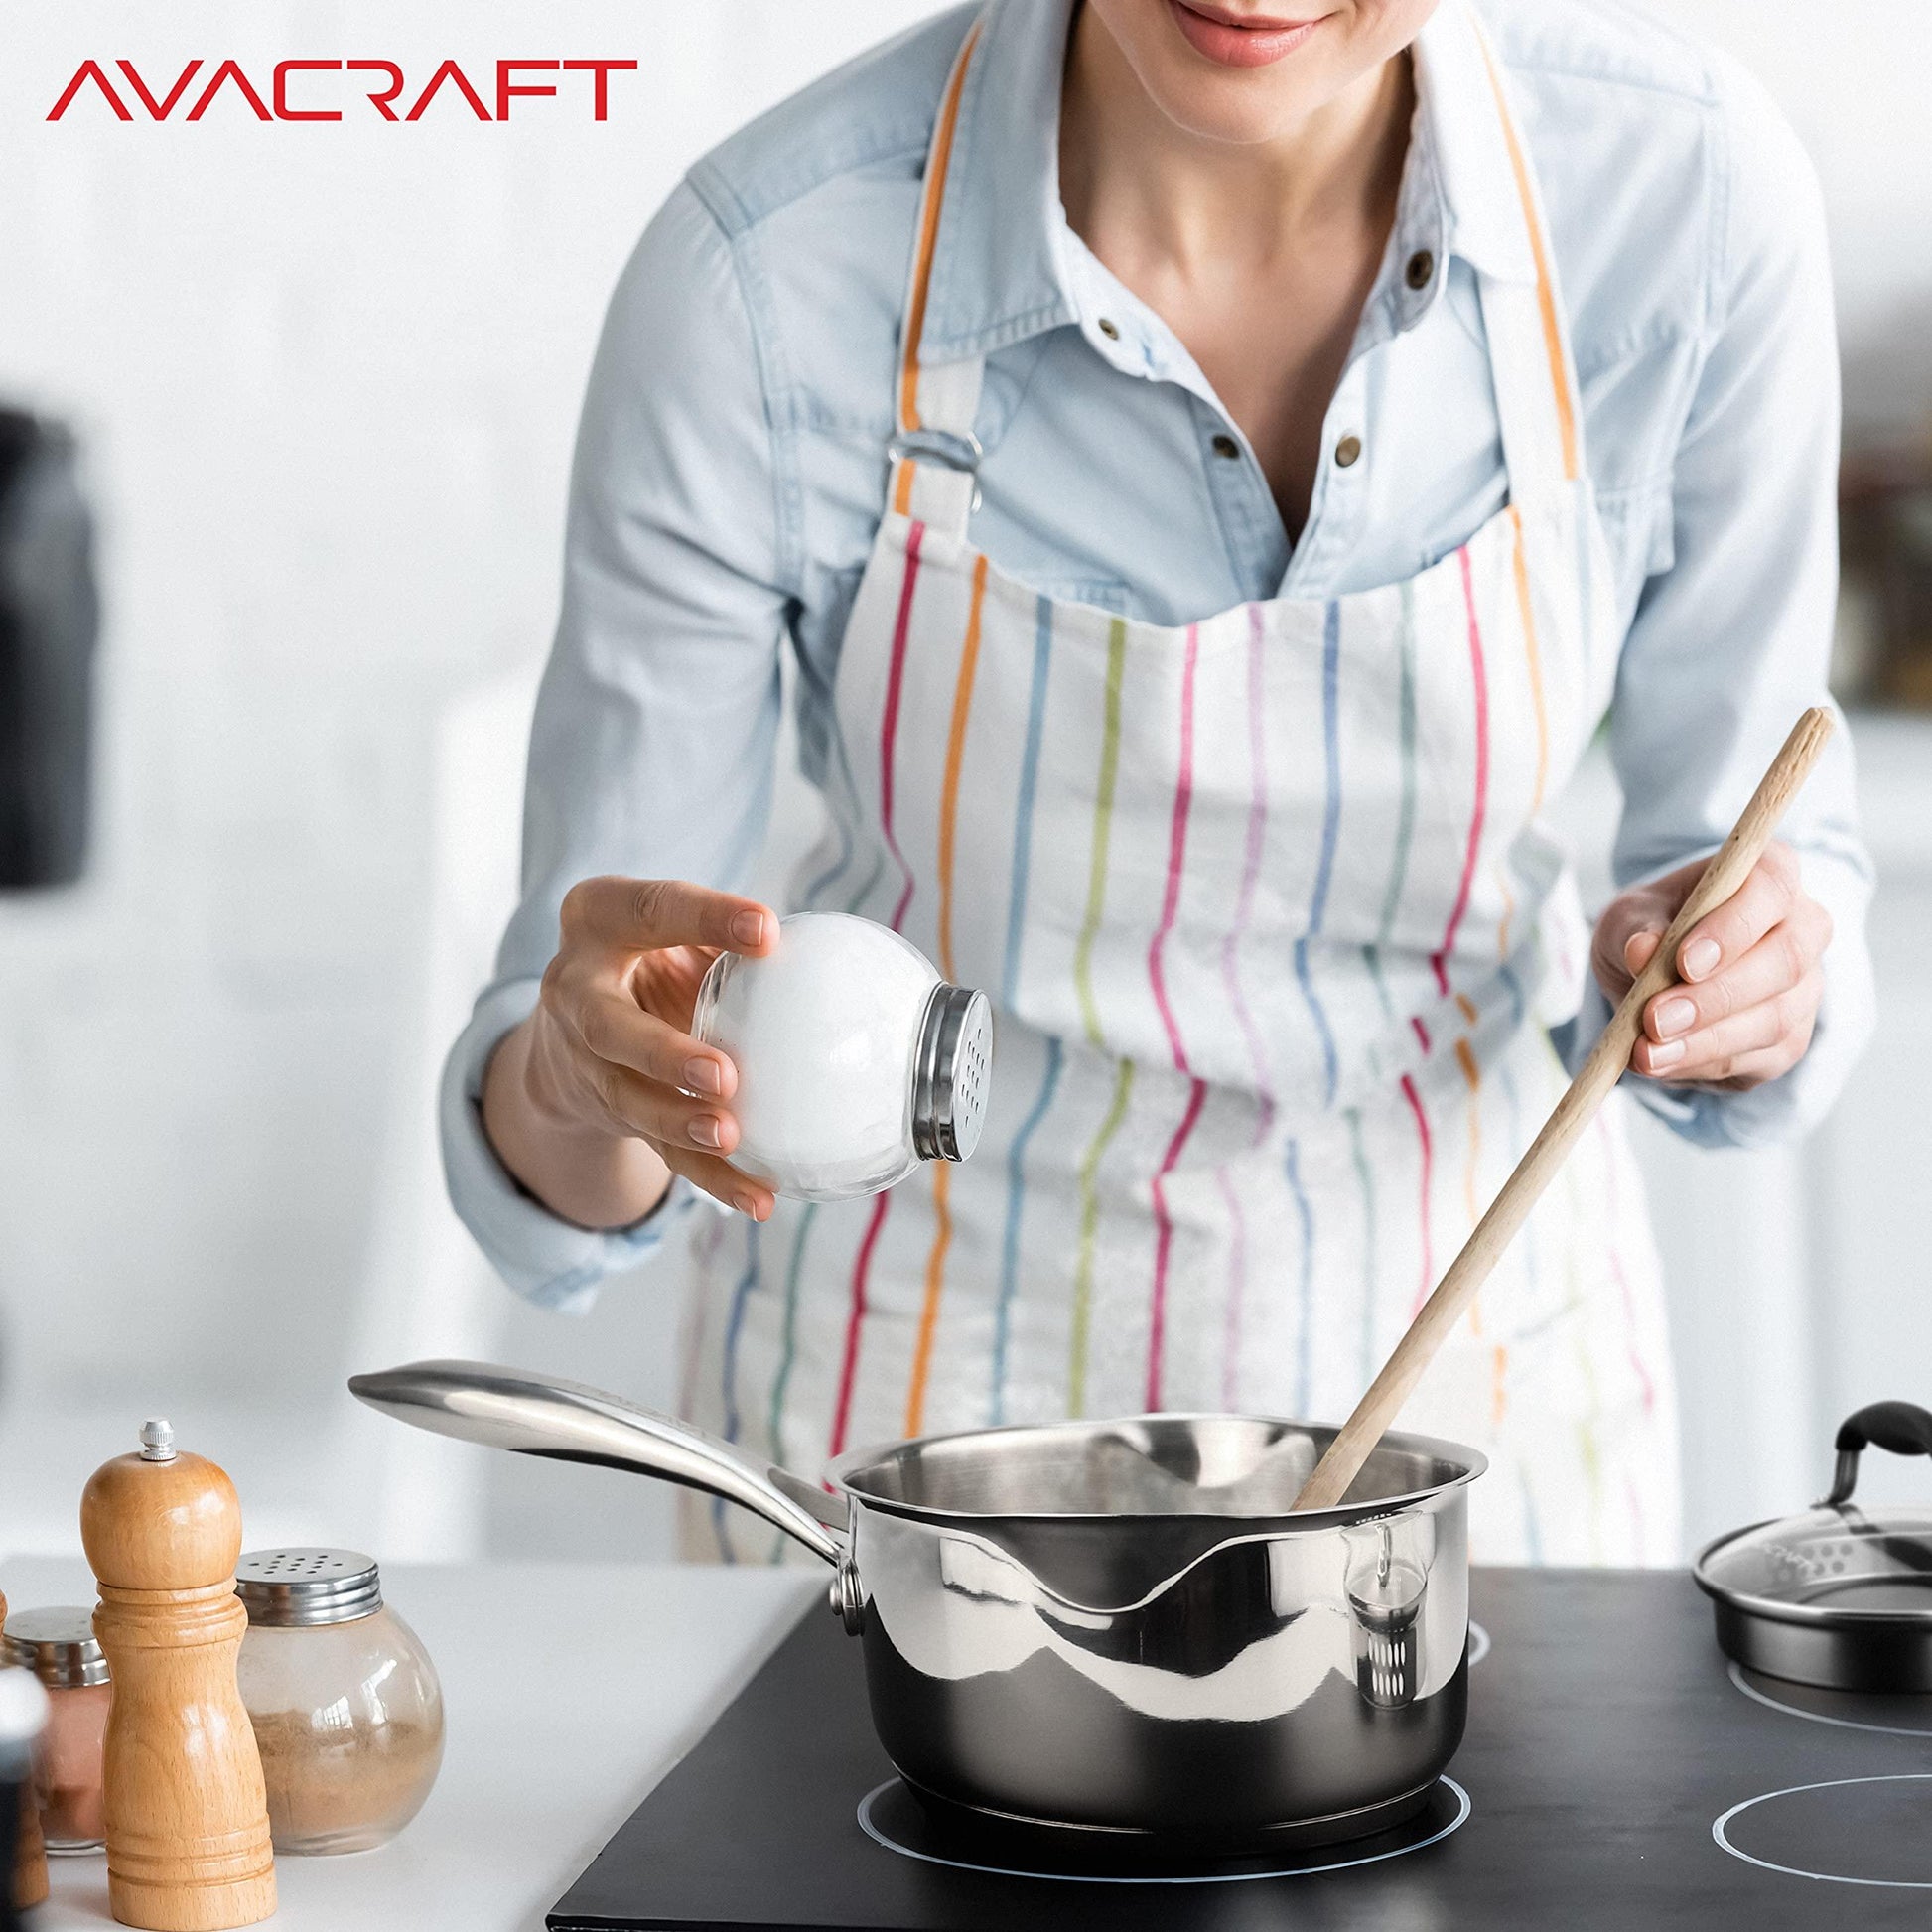 AVACRAFT Multipurpose Sauce Pan / Pot, Stainless Steel with Glass Strainer Lid, Two Side Spouts for Easy Pour with Ergonomic Handle (Tri-Ply Capsule Bottom, 1.5 Quart) - CookCave